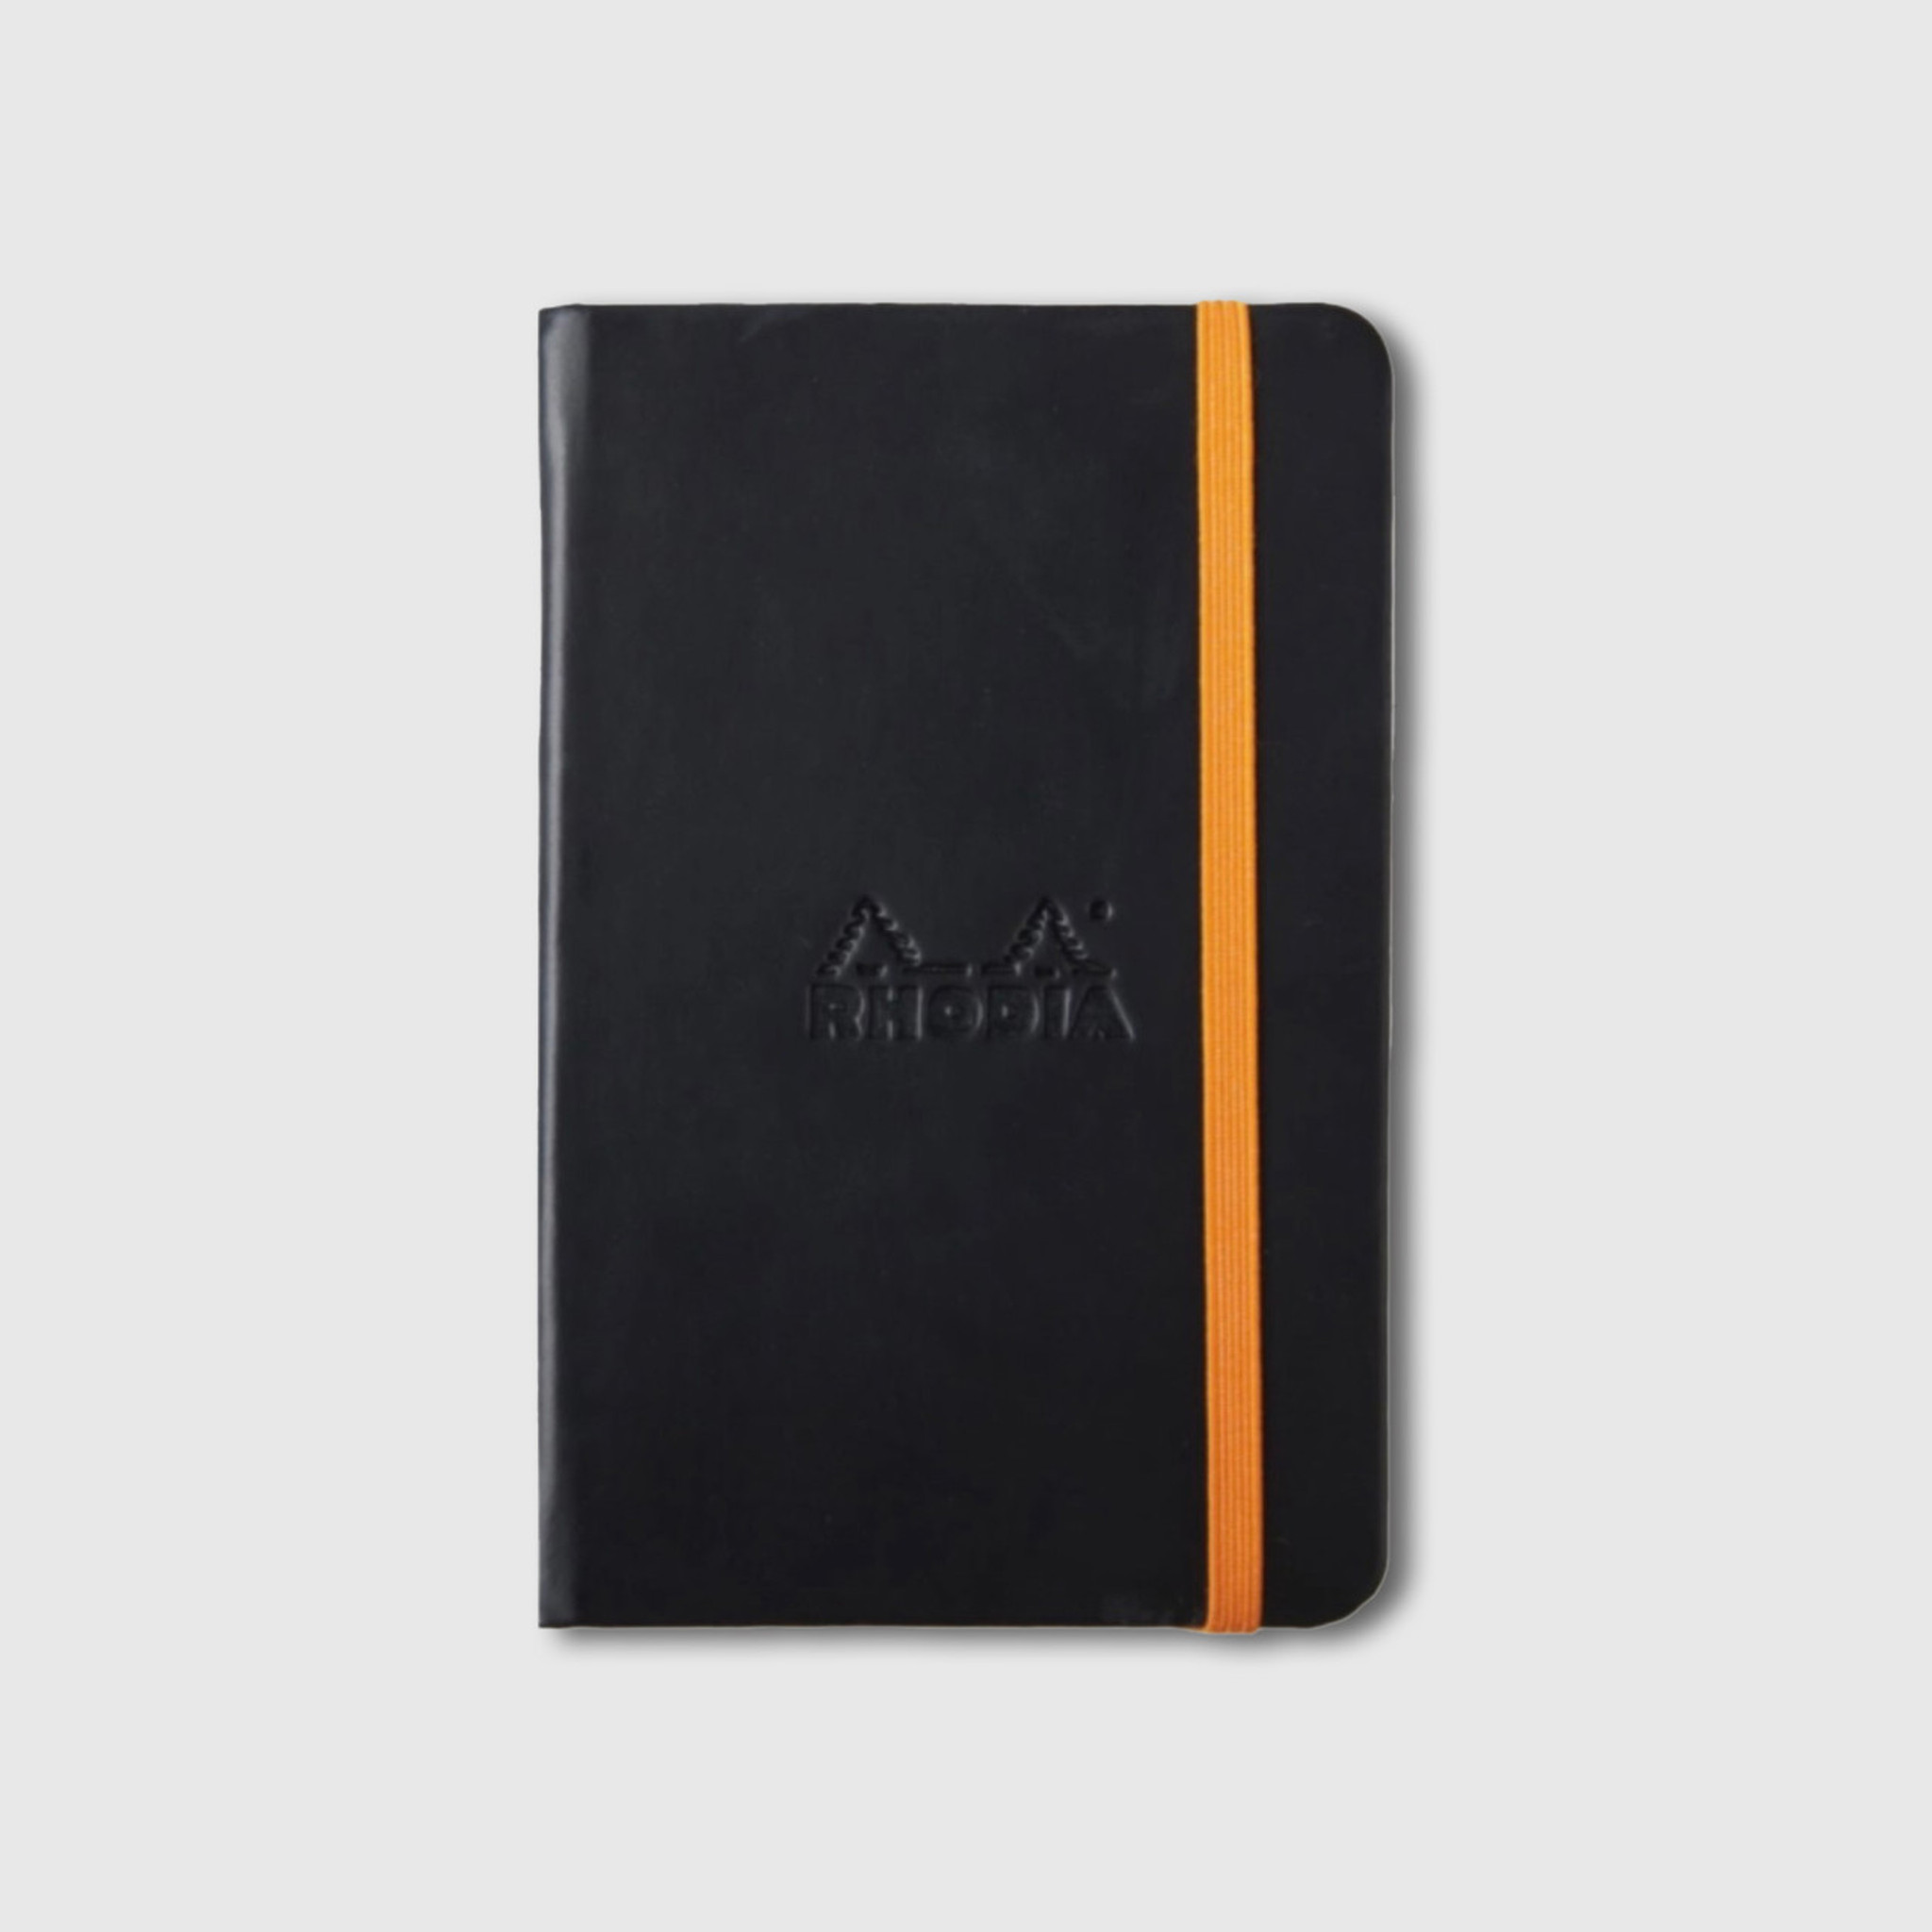 Rhodia Softcover Journal, Large, 7.5" x 9.75" 